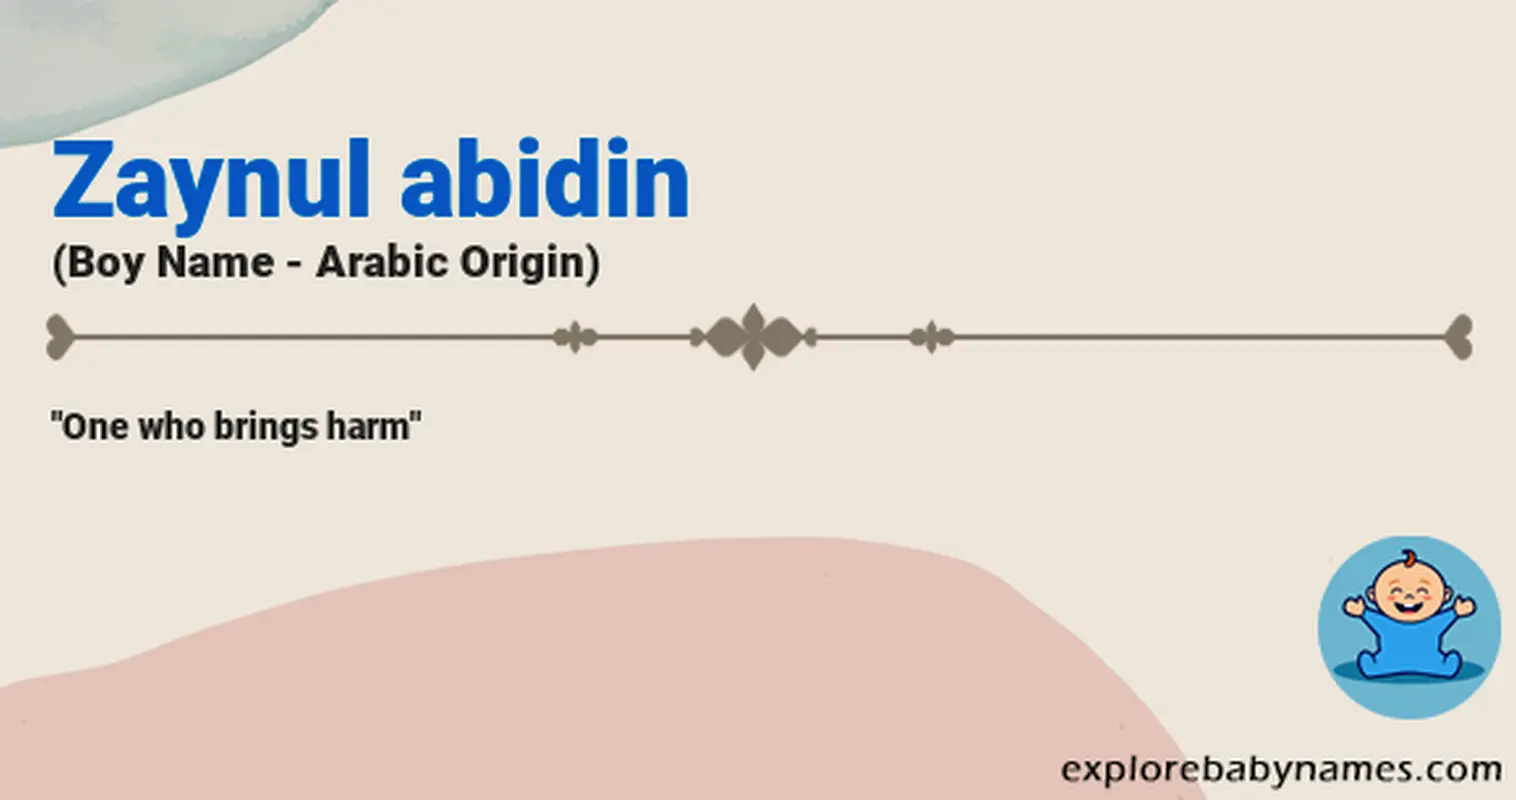 Meaning of Zaynul abidin